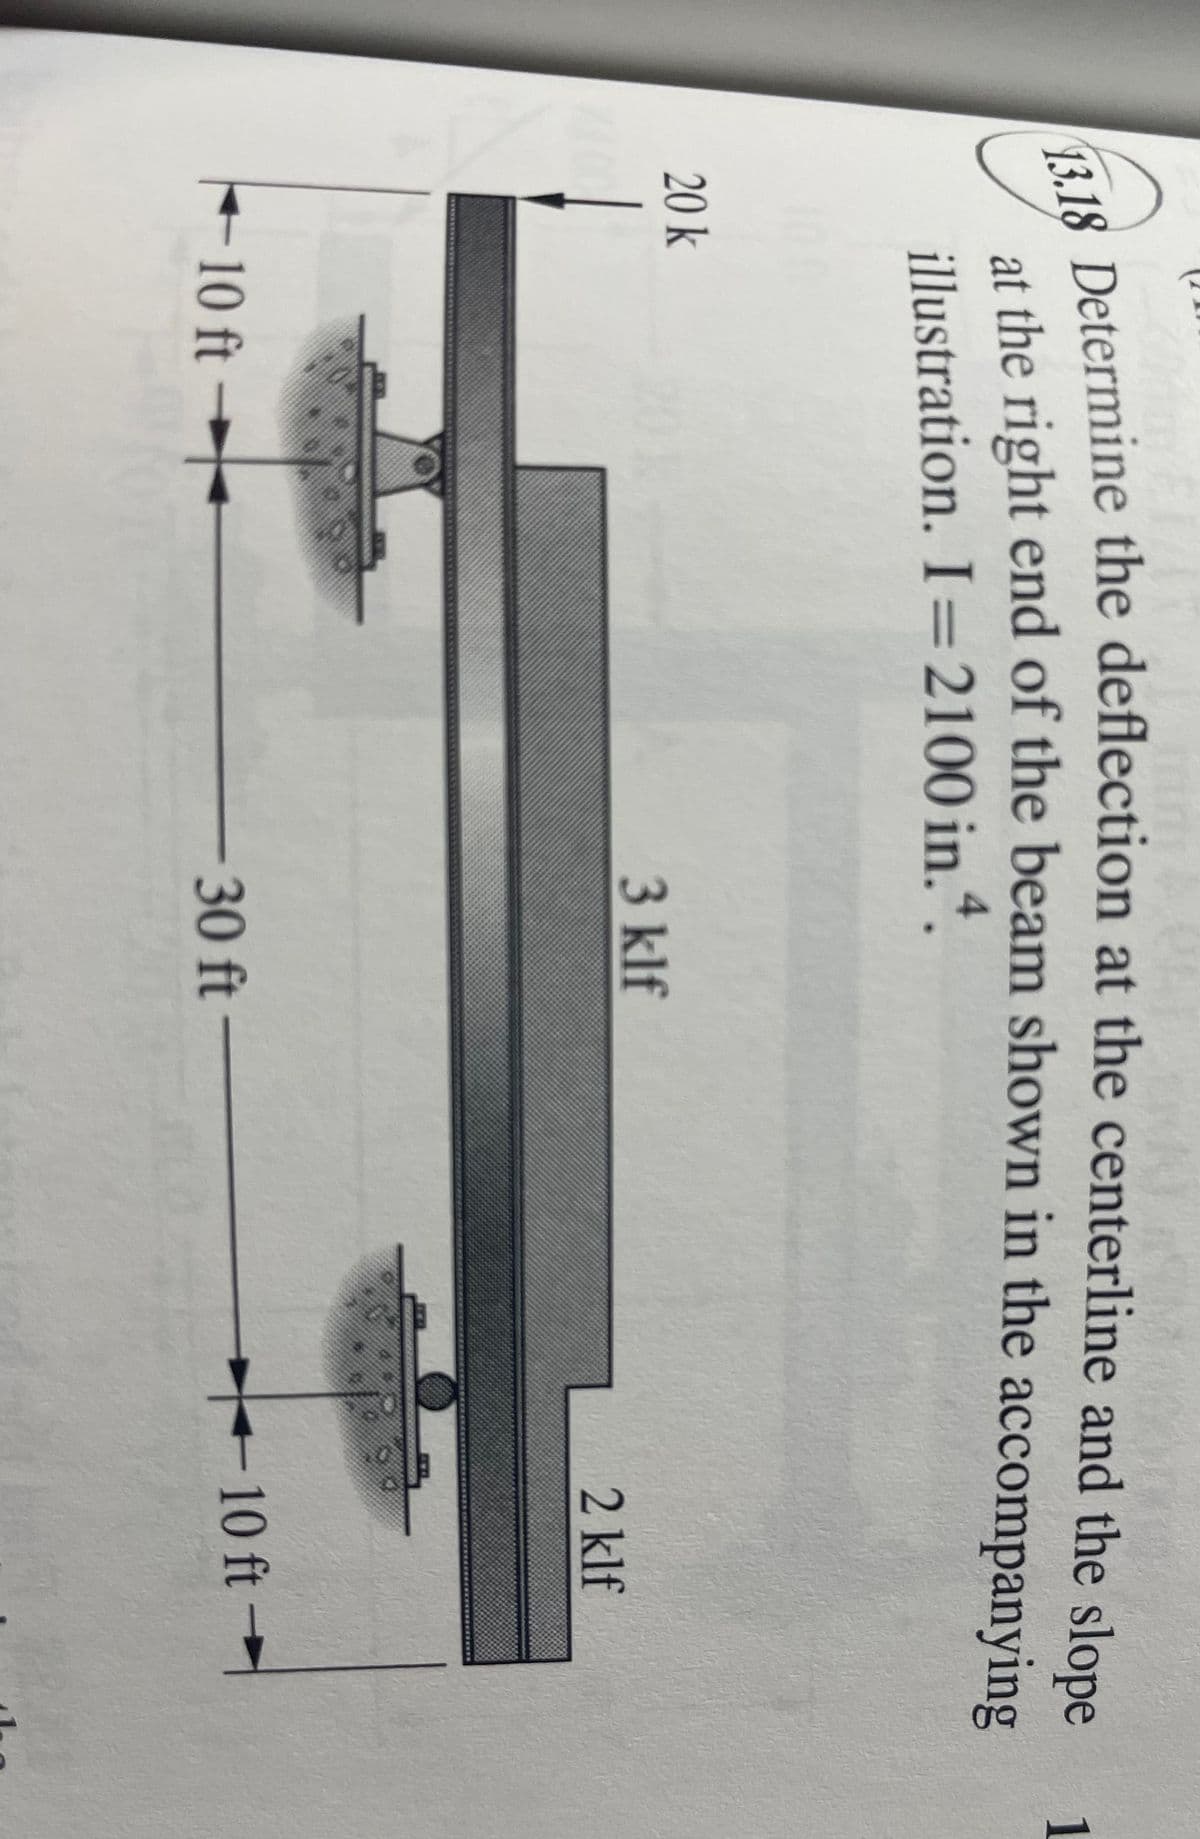 13.18 Determine the deflection at the centerline and the slope
at the right end of the beam shown in the accompanying
illustration. I = 2100 in.4.
20 k
<-10 ft
3 klf
-30 ft-
2 klf
-10 ft-
1